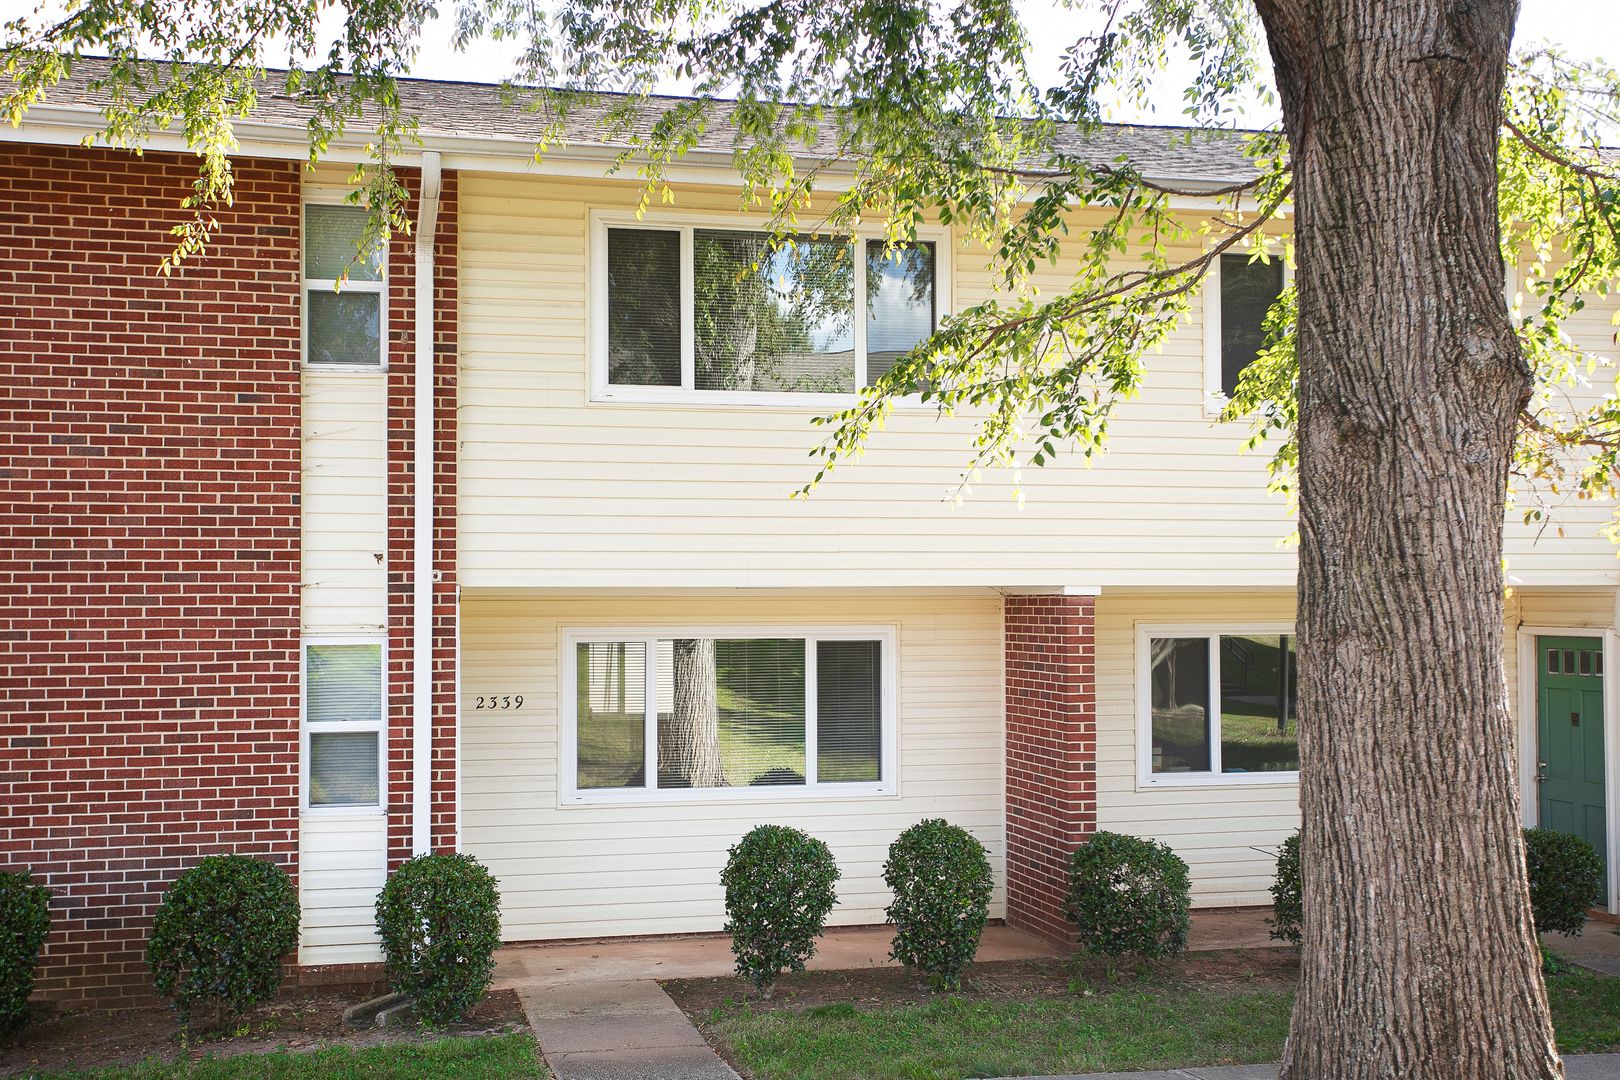 3 bed/2.5 bath right across from NC State's Centennial Campus!